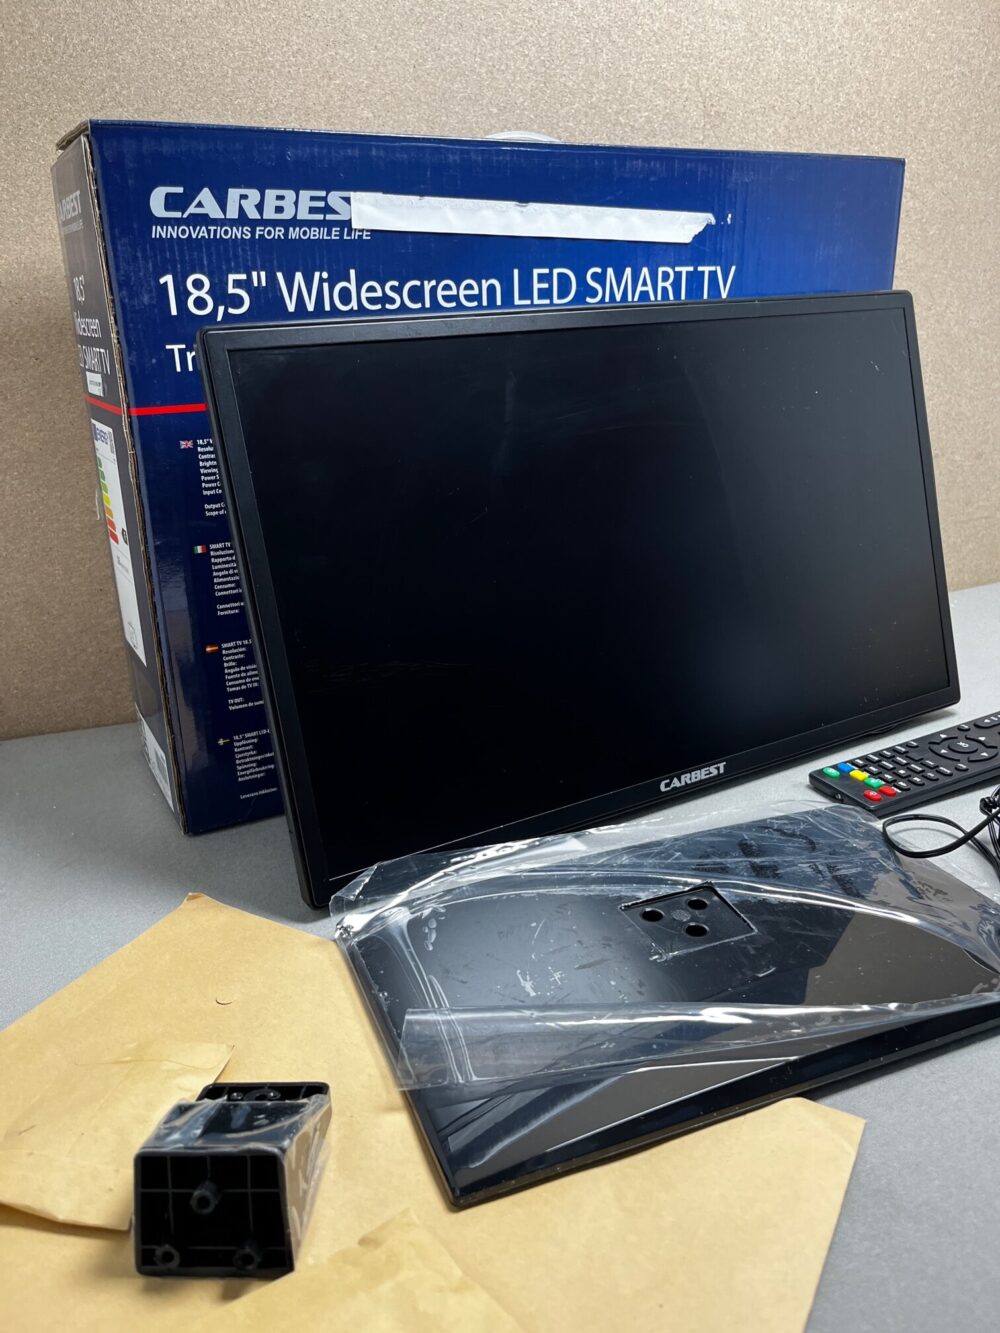 Carbest 18,5`` Widescreen LED Smart TV